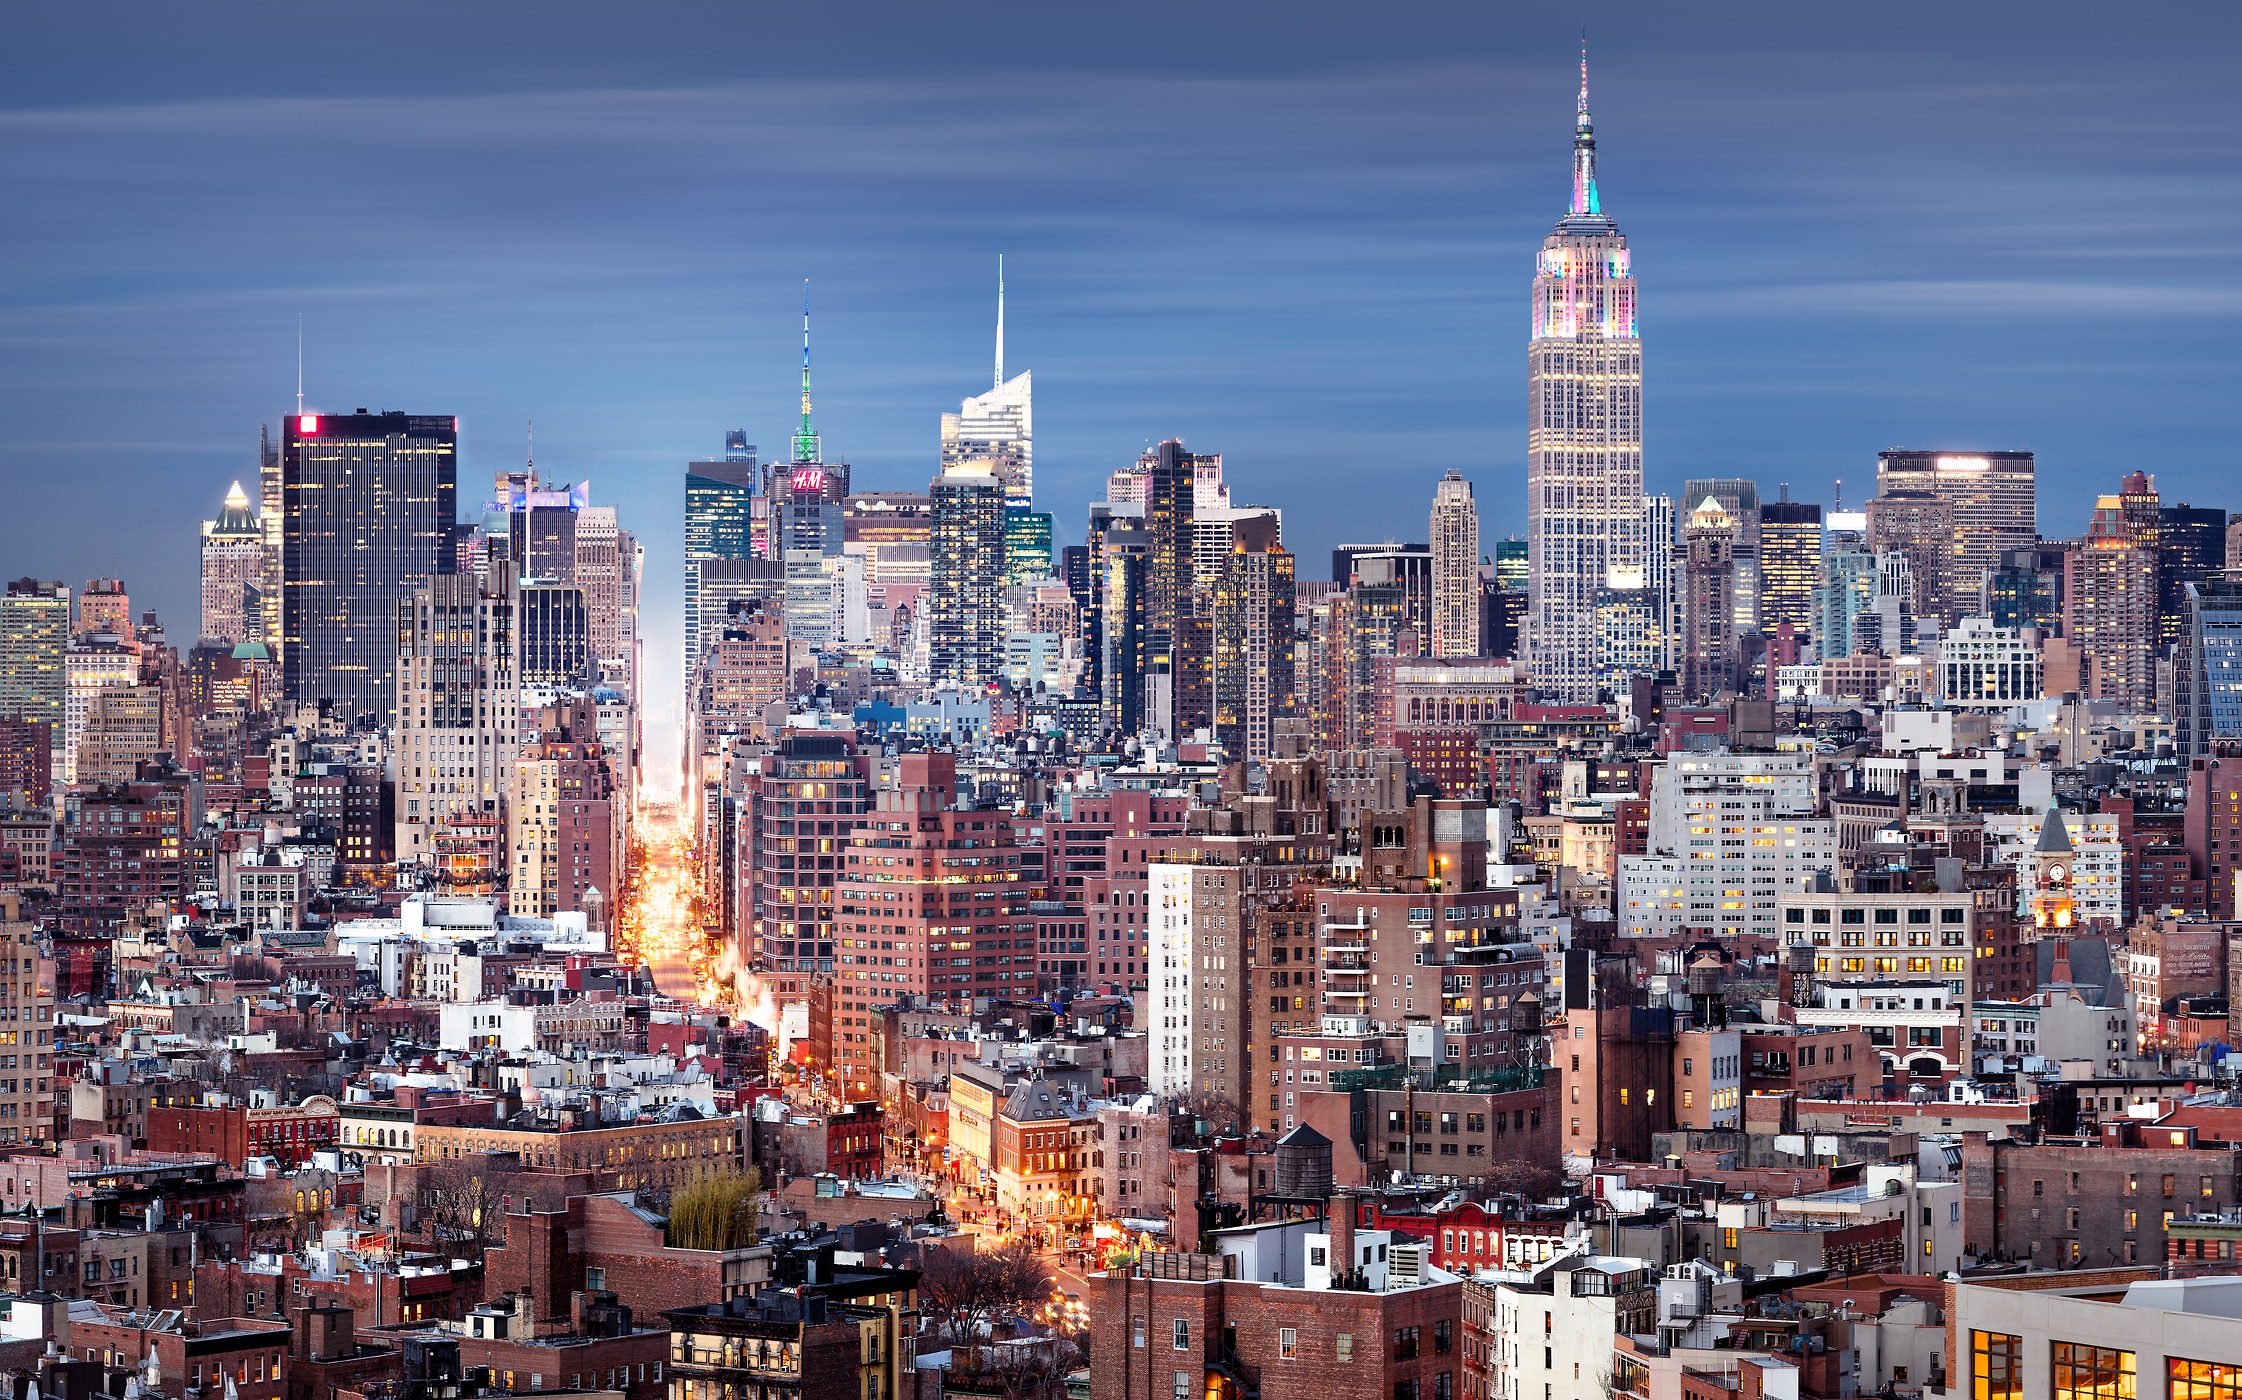 185 megapixels! A very high resolution, large-format VAST photo print of the Manhattan, New York City skyline at dusk; cityscape photo created by Dan Piech